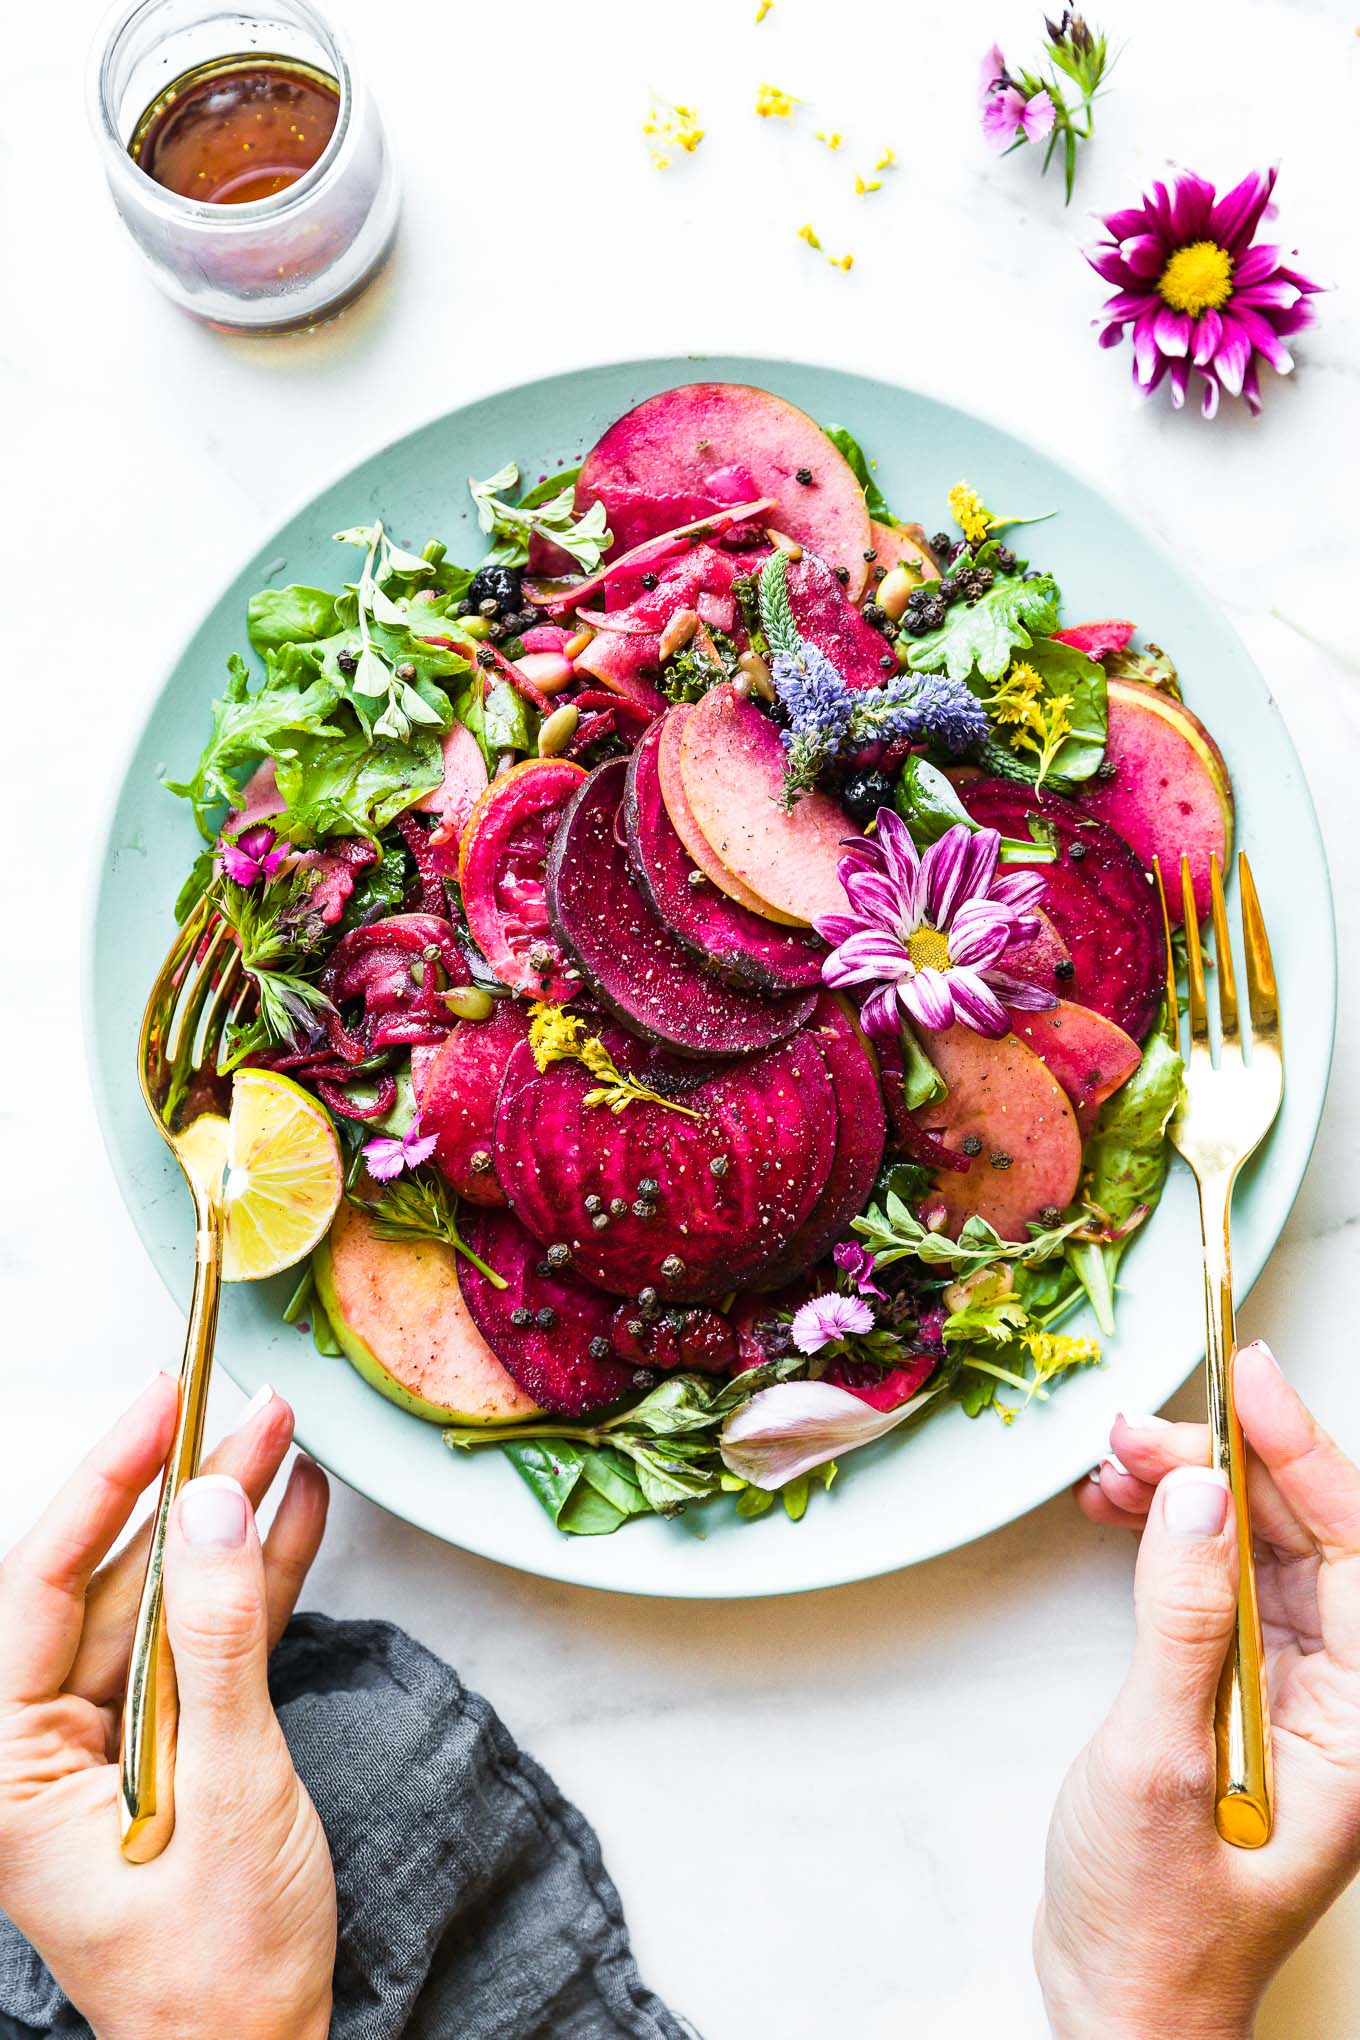 Marinated beet and apple salad over mixed greens on turquoise plate.